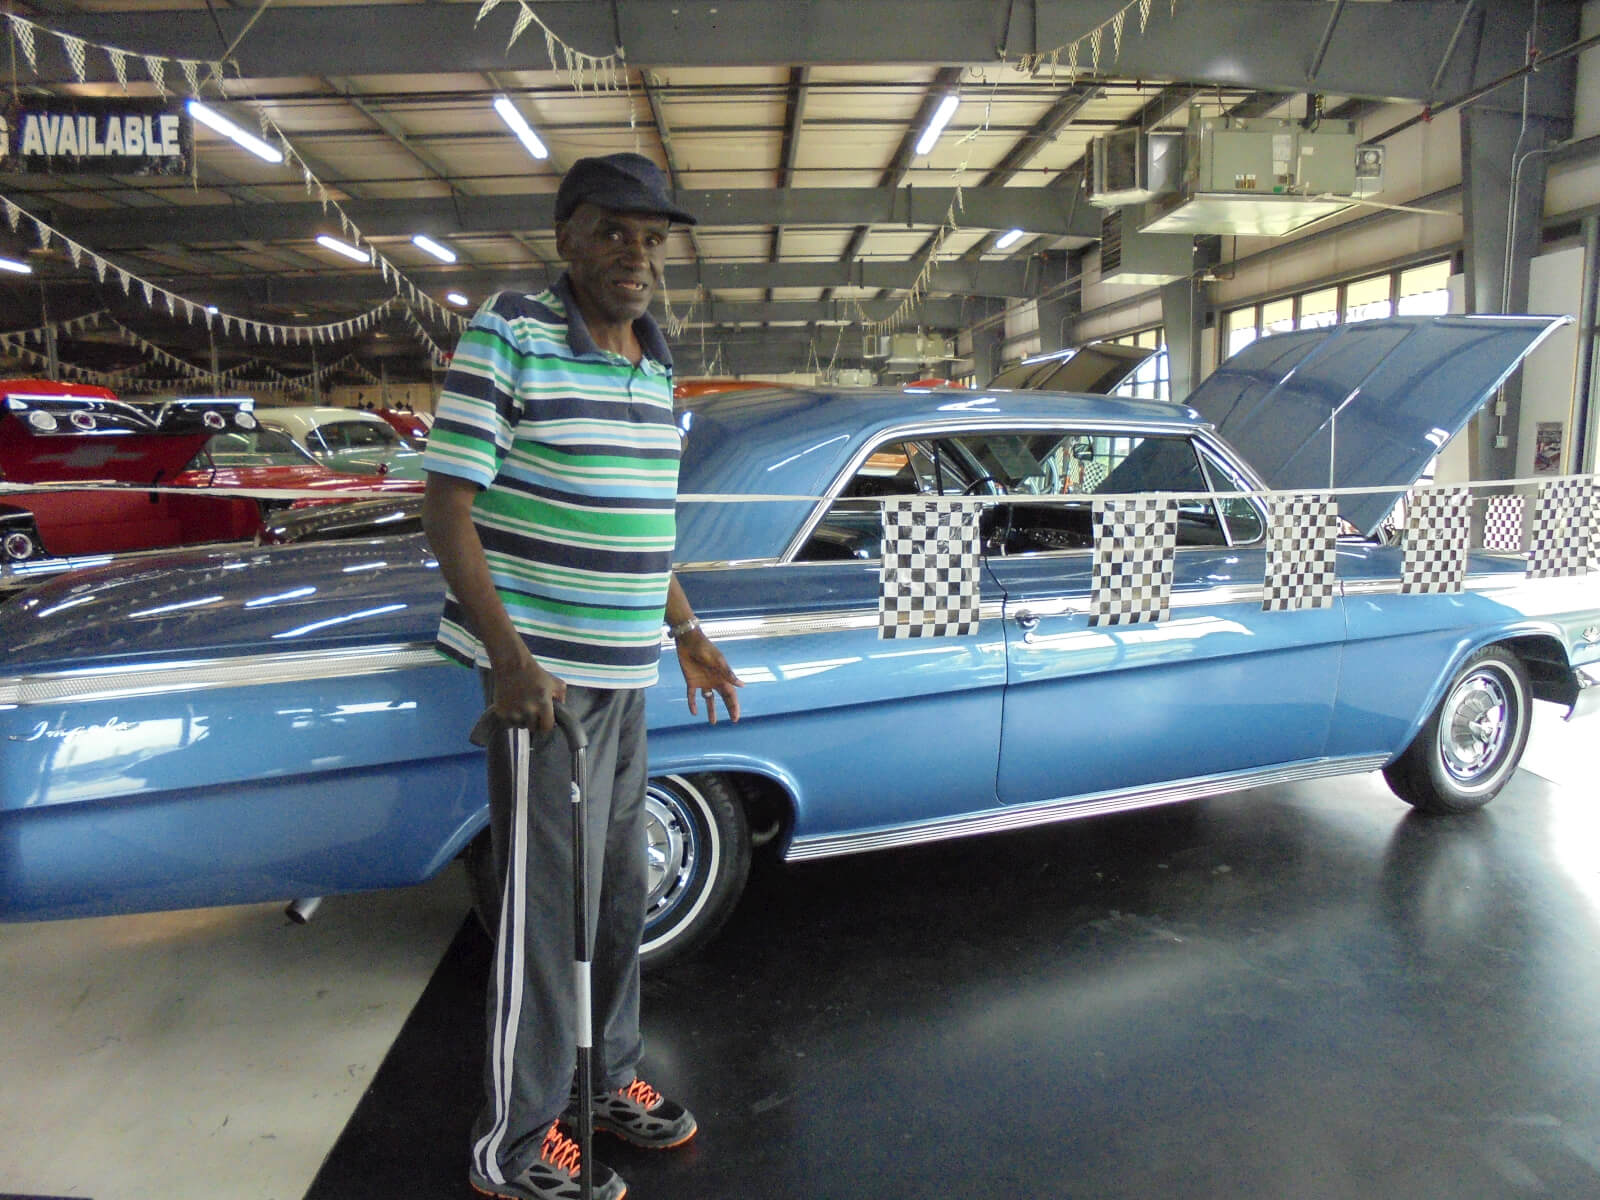 Oakview Commons resident Johnny Baldwin posing with a classic car